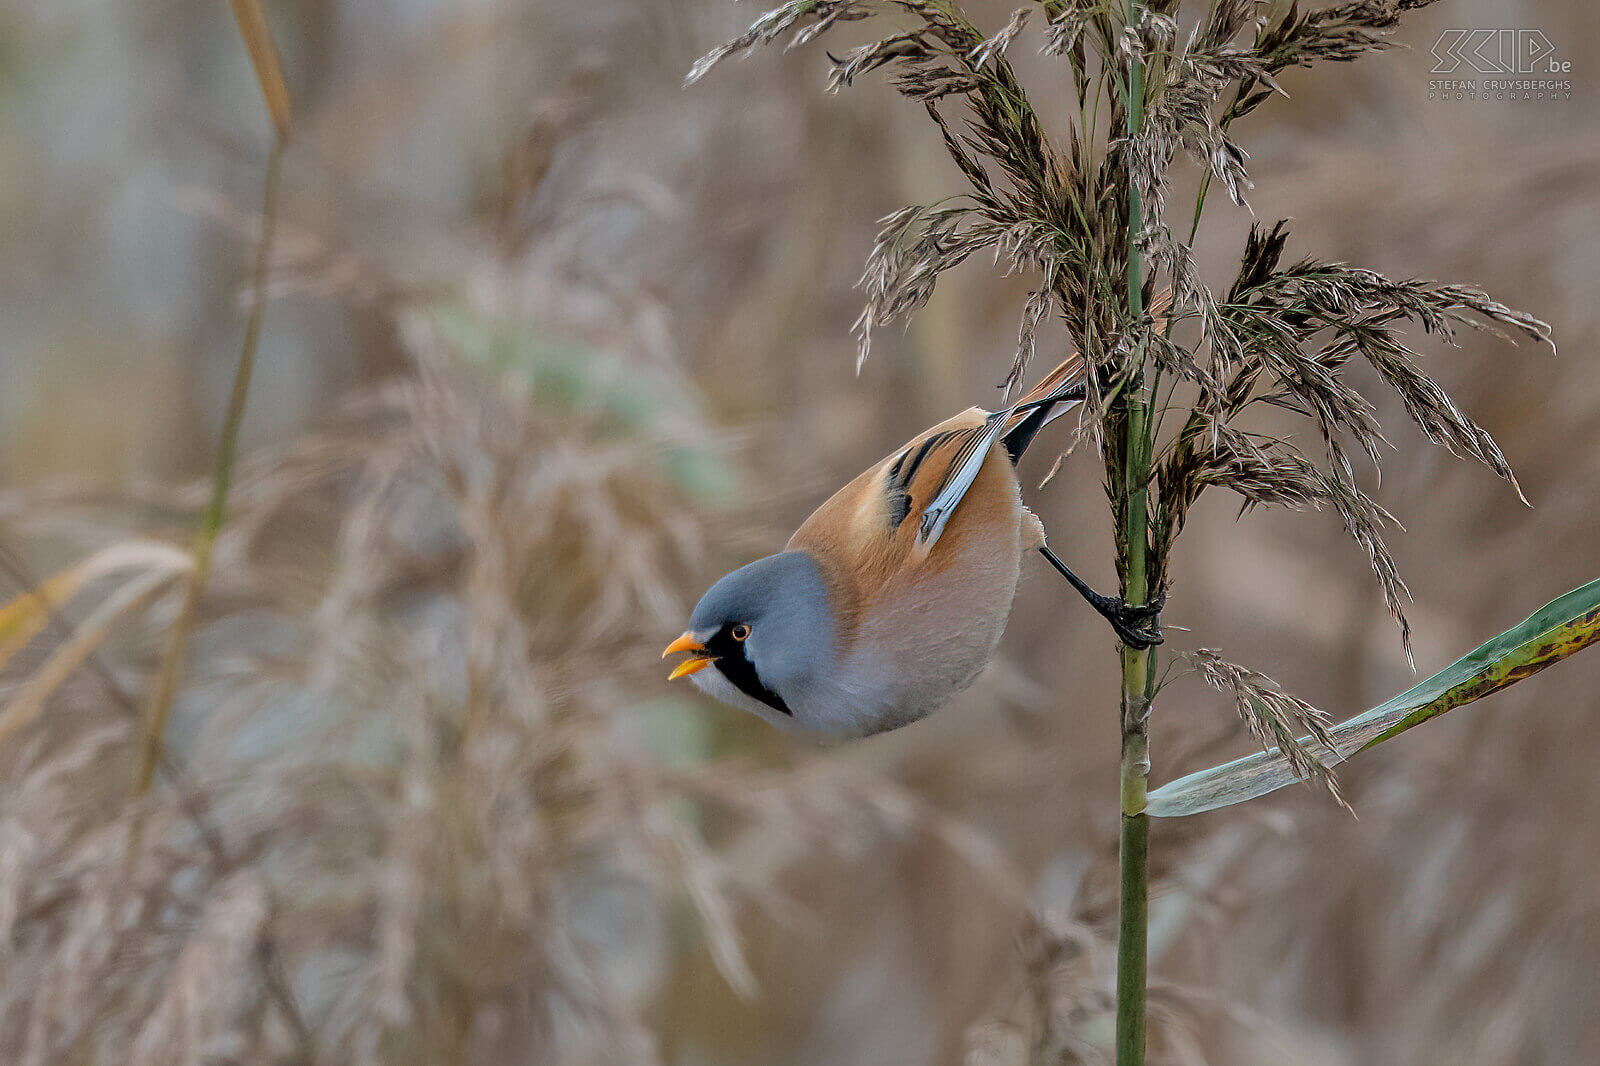 Bearded readling The bearded reedling can only be found in reed fields, they are quite social and are usually seen in groups of up to several dozen birds. The adult male has characteristic black 'moustache'. Stefan Cruysberghs